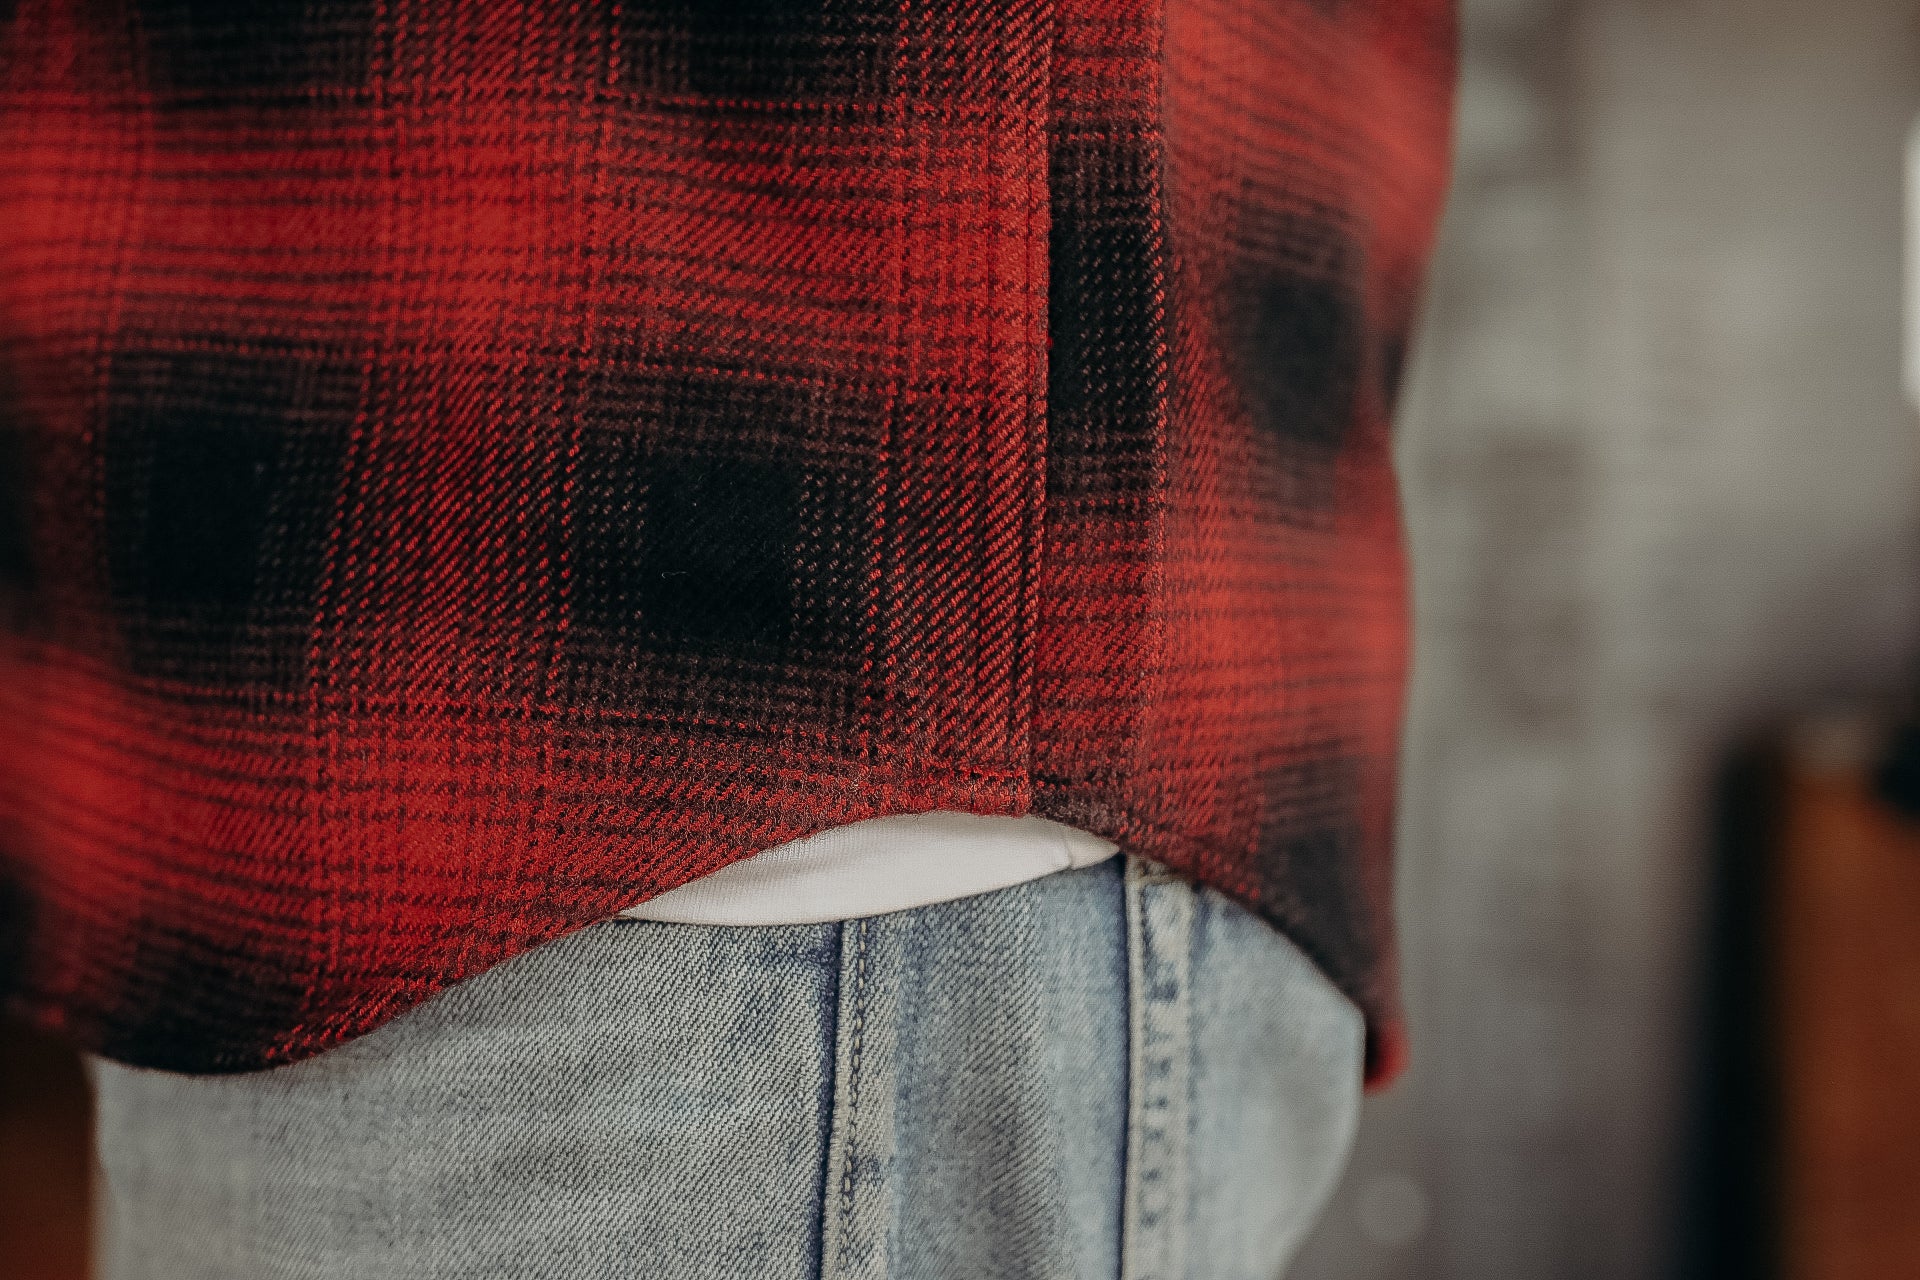 Ultra Heavy Flannel Ombré Check Western Shirt - Red/Black